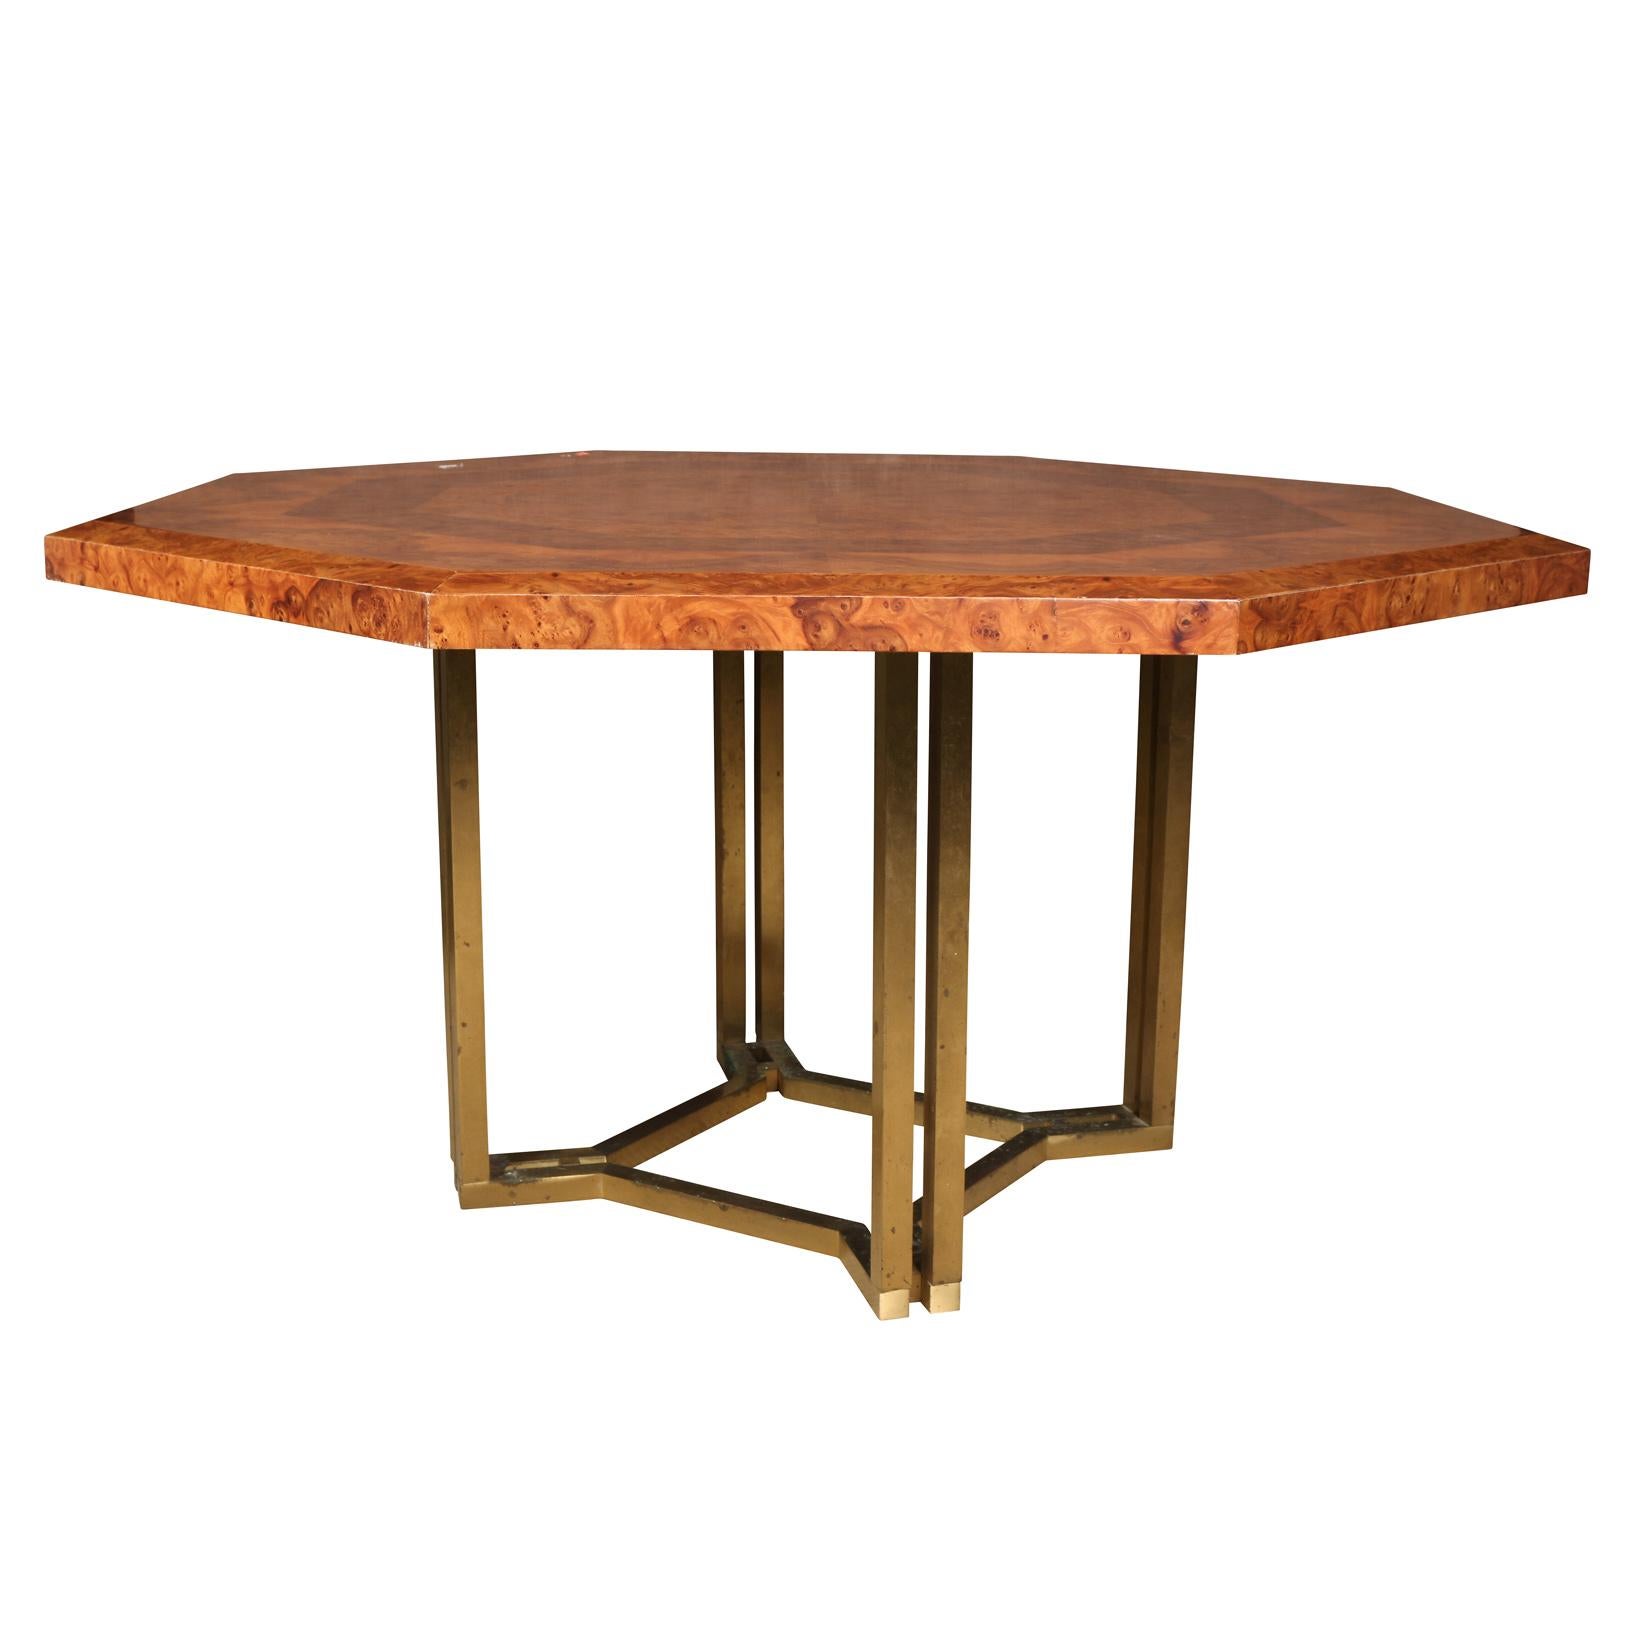 A vintage Guy Lefevre for Maison Jansen octagonal dining table with a four sided geometric brass base. Table has a geometric concentric pattern with a burled wood, two tone top.